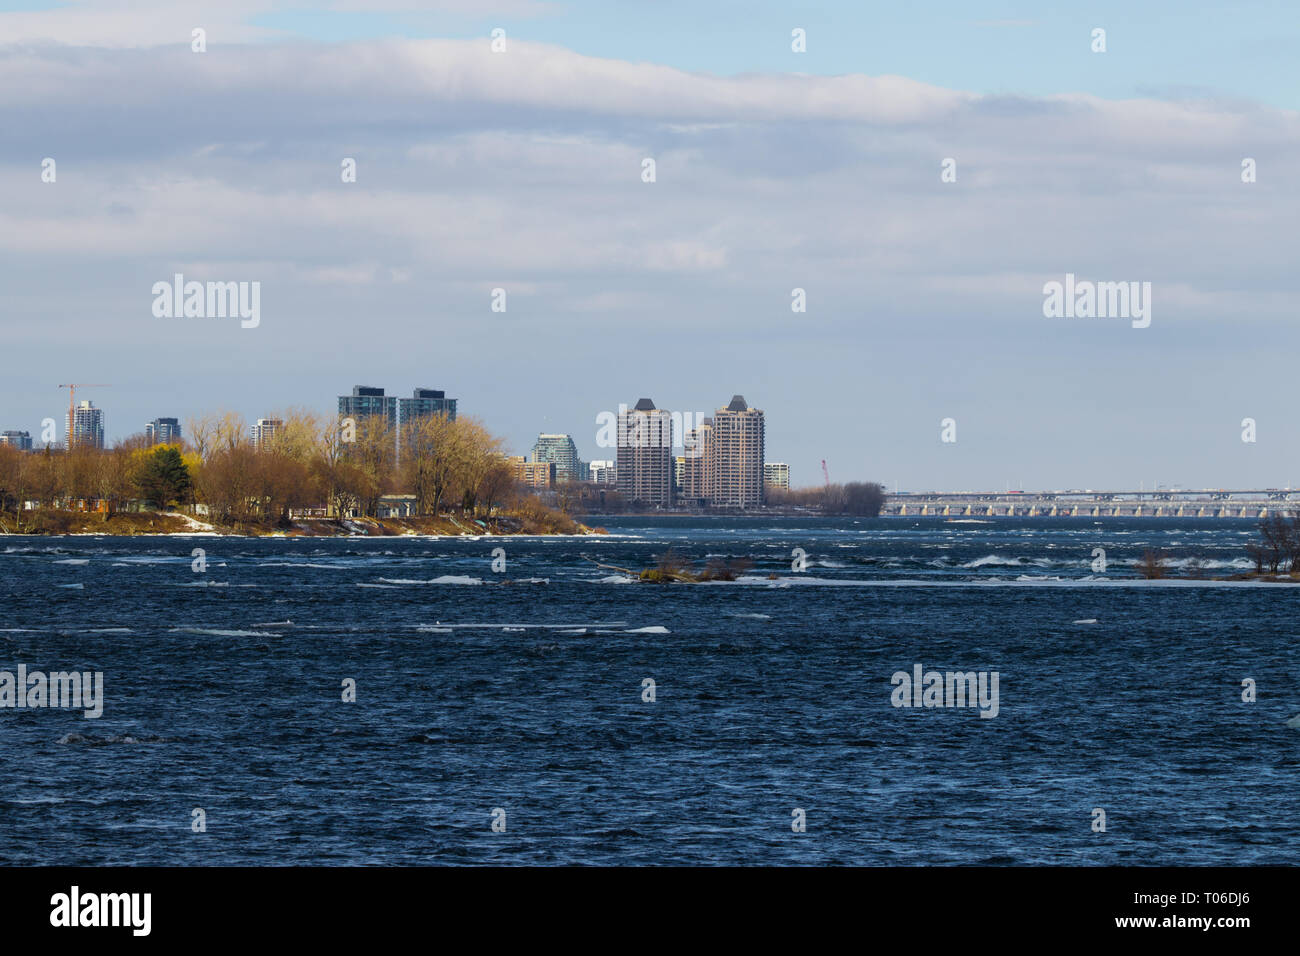 Landscape by the river at the beggining of Spring. View of Ile des Soeurs and Champlain Bridge, Montreal, Quebec, Canada Stock Photo